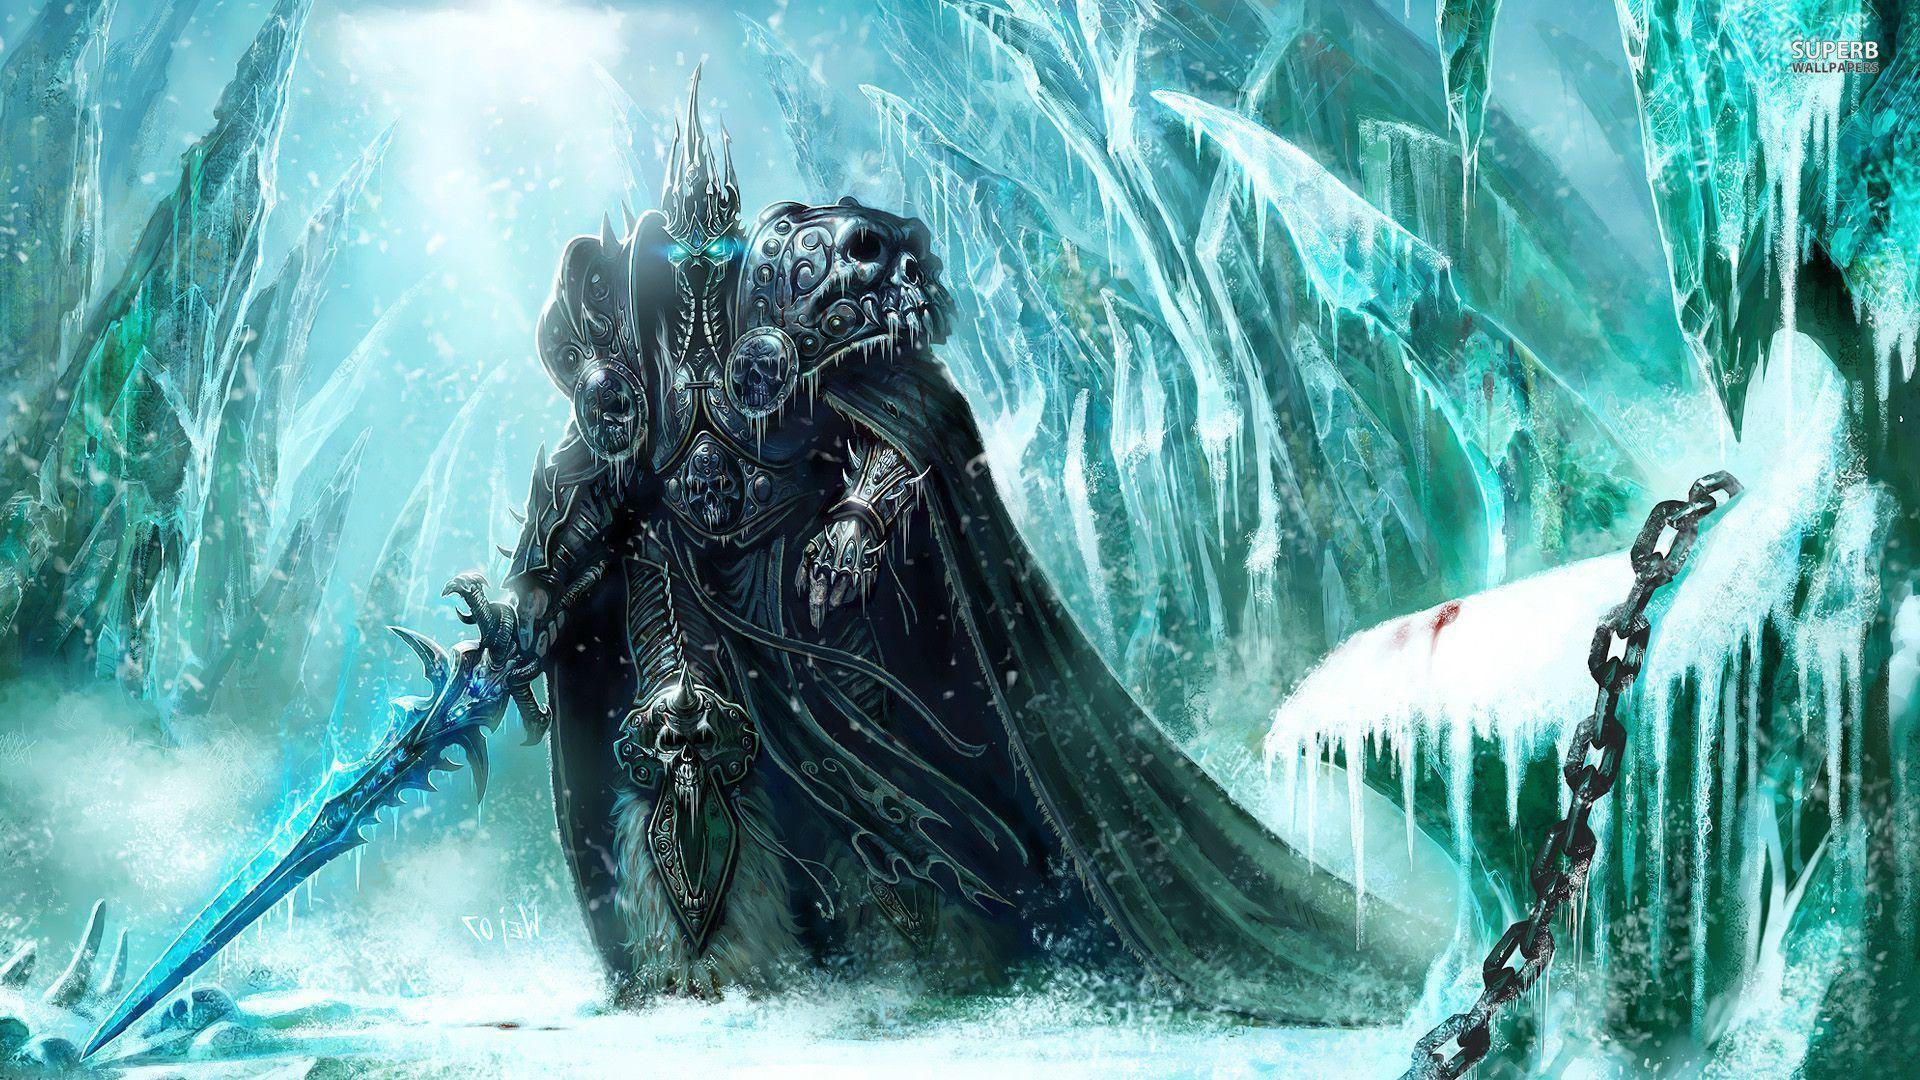 World Of Warcraft: Wrath Of The Lich King Wallpapers